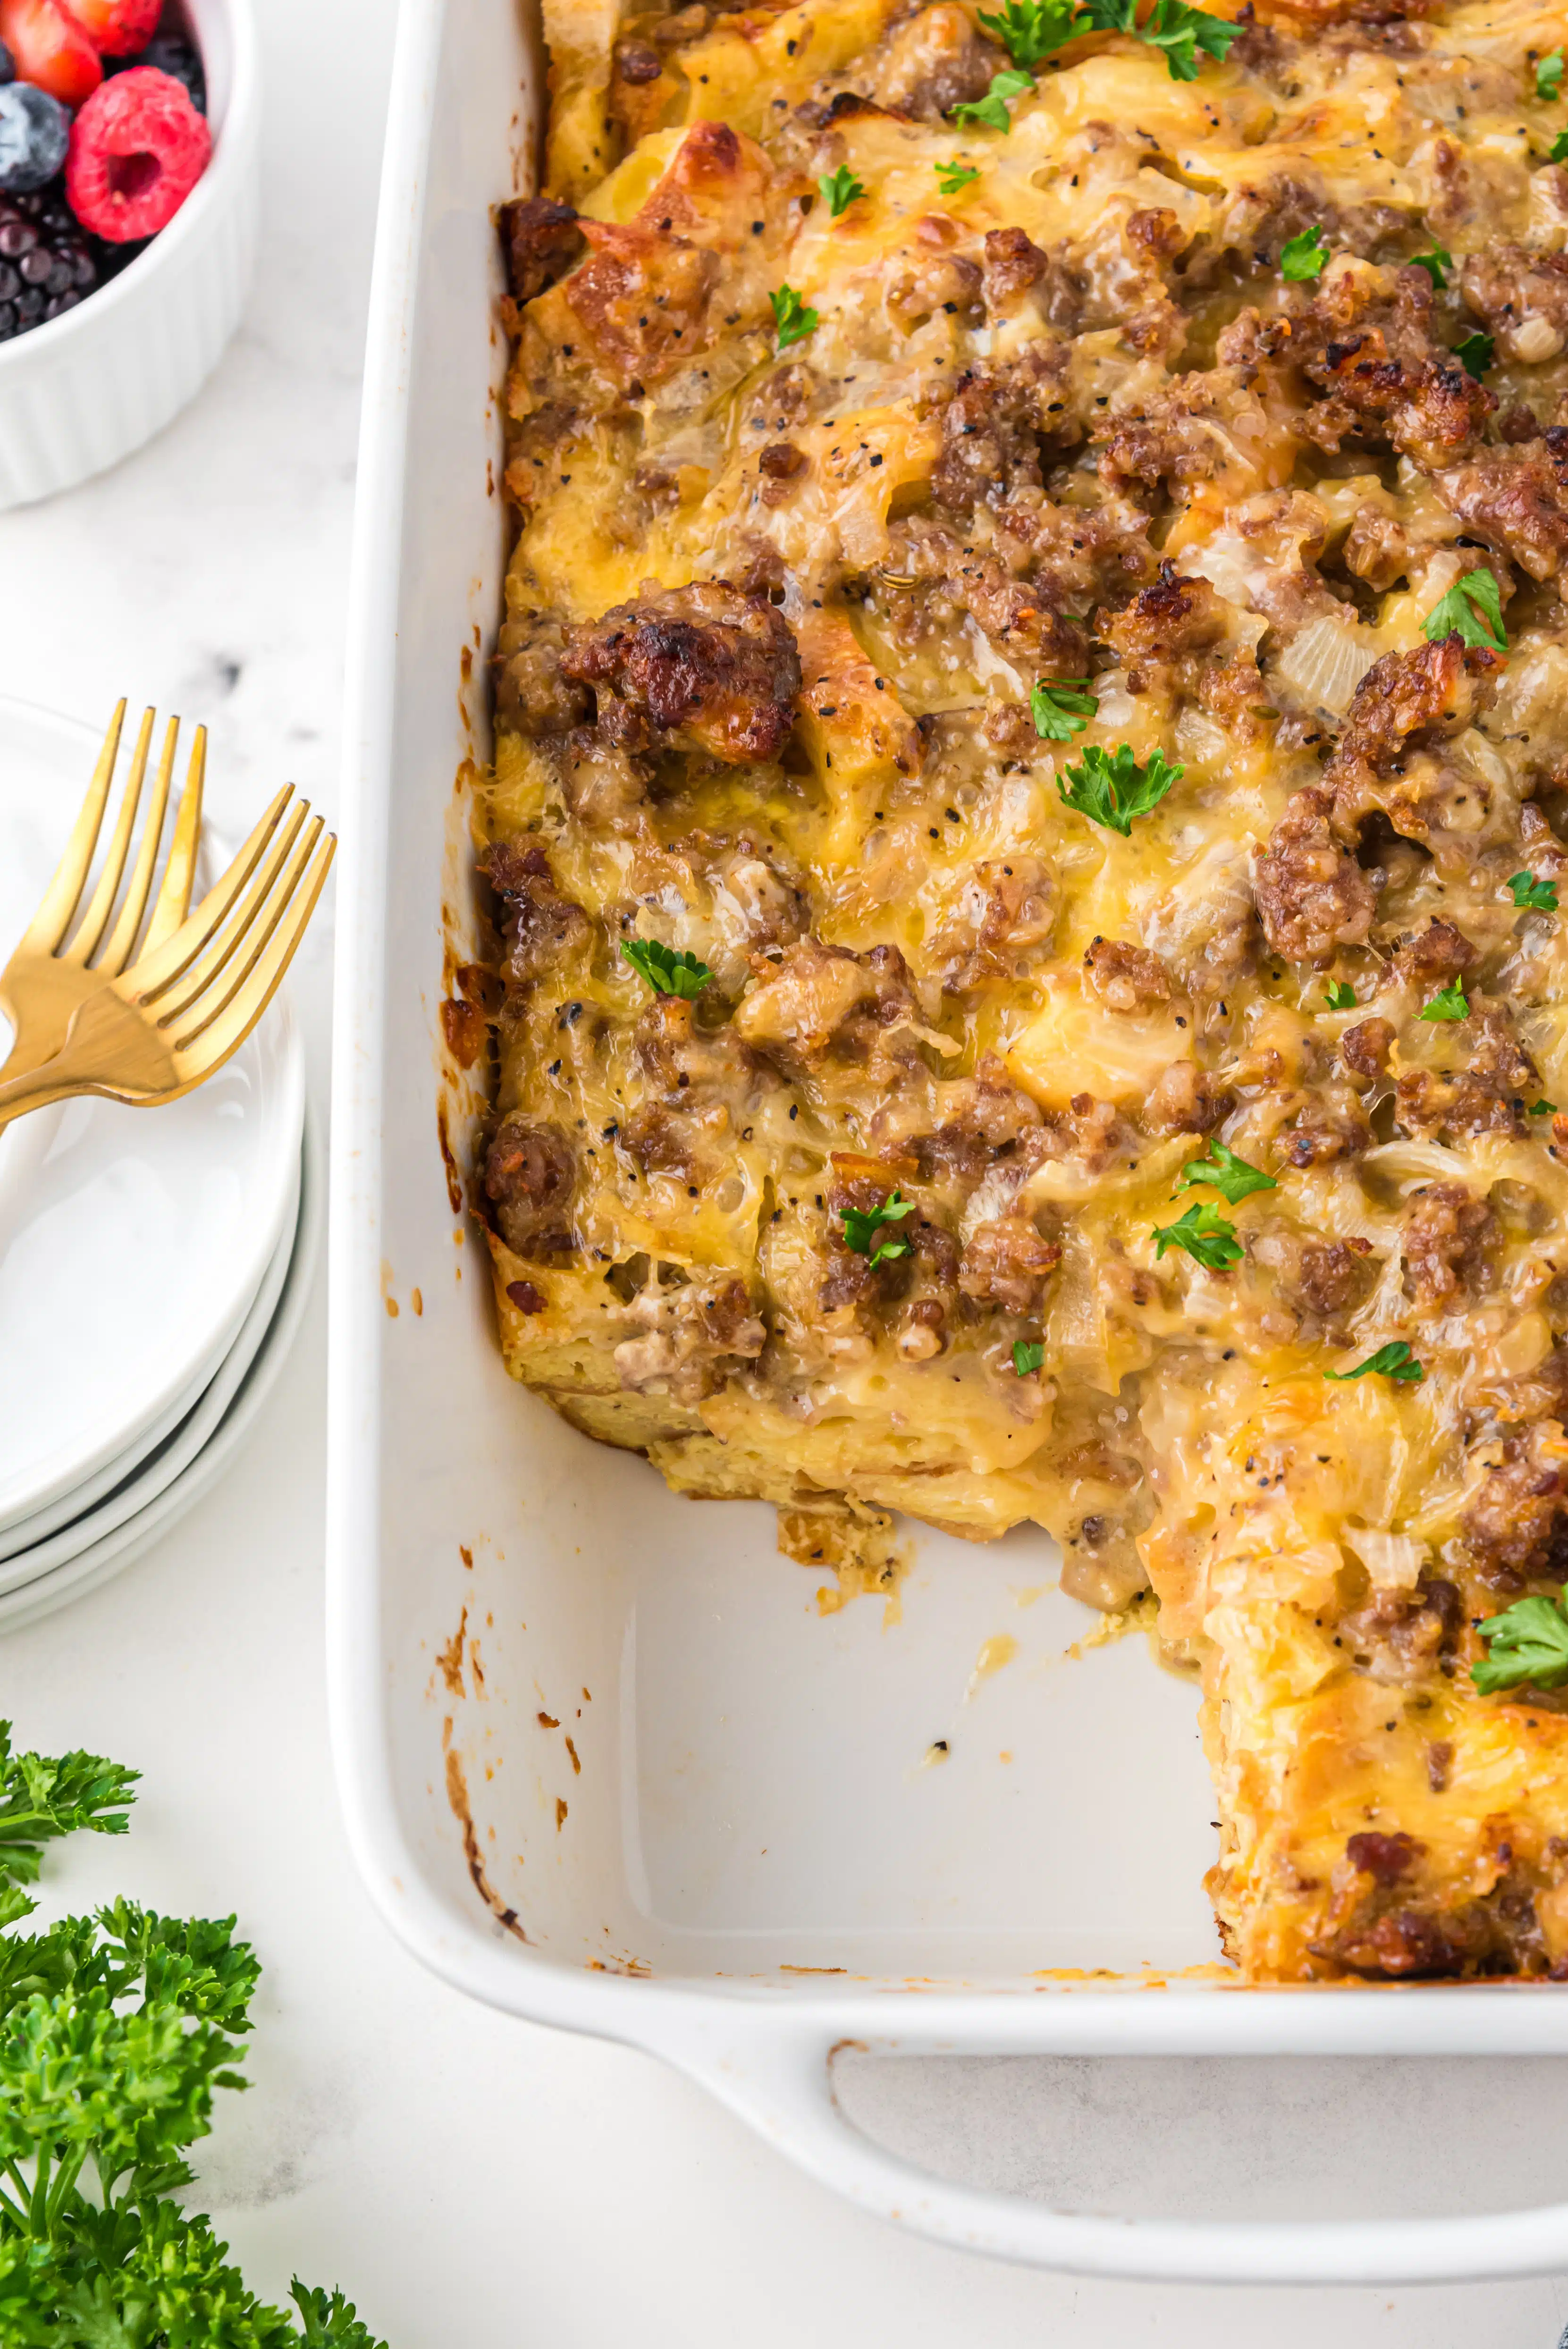 White baking dish filled with breakfast casserole made with eggs, cheese, sausage, and bread.